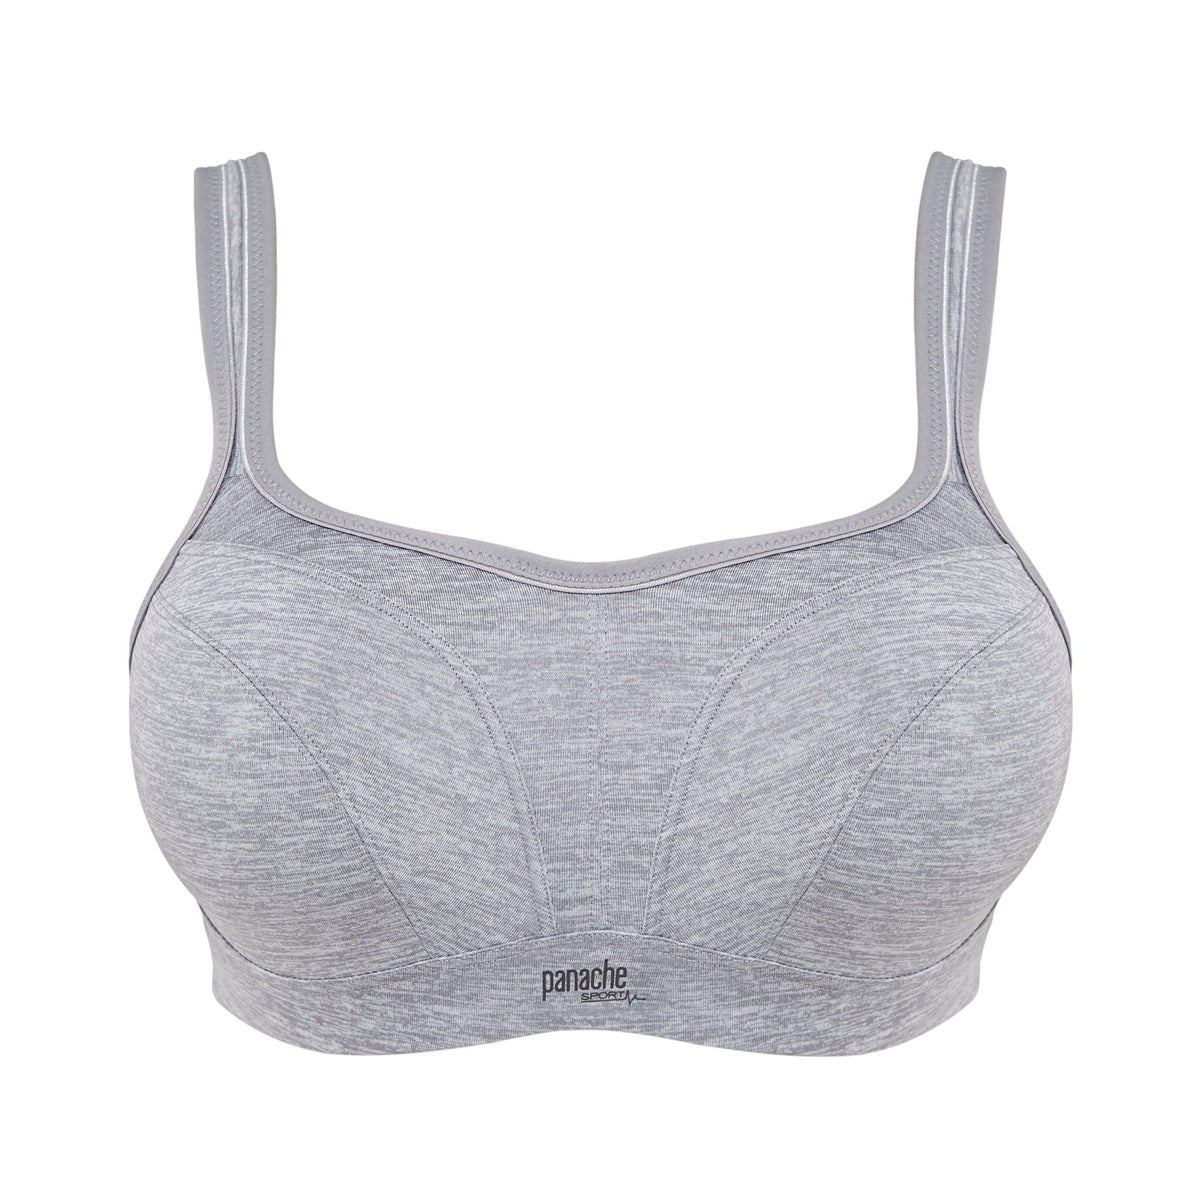 Sports Bras for sale in Jaffrey, New Hampshire